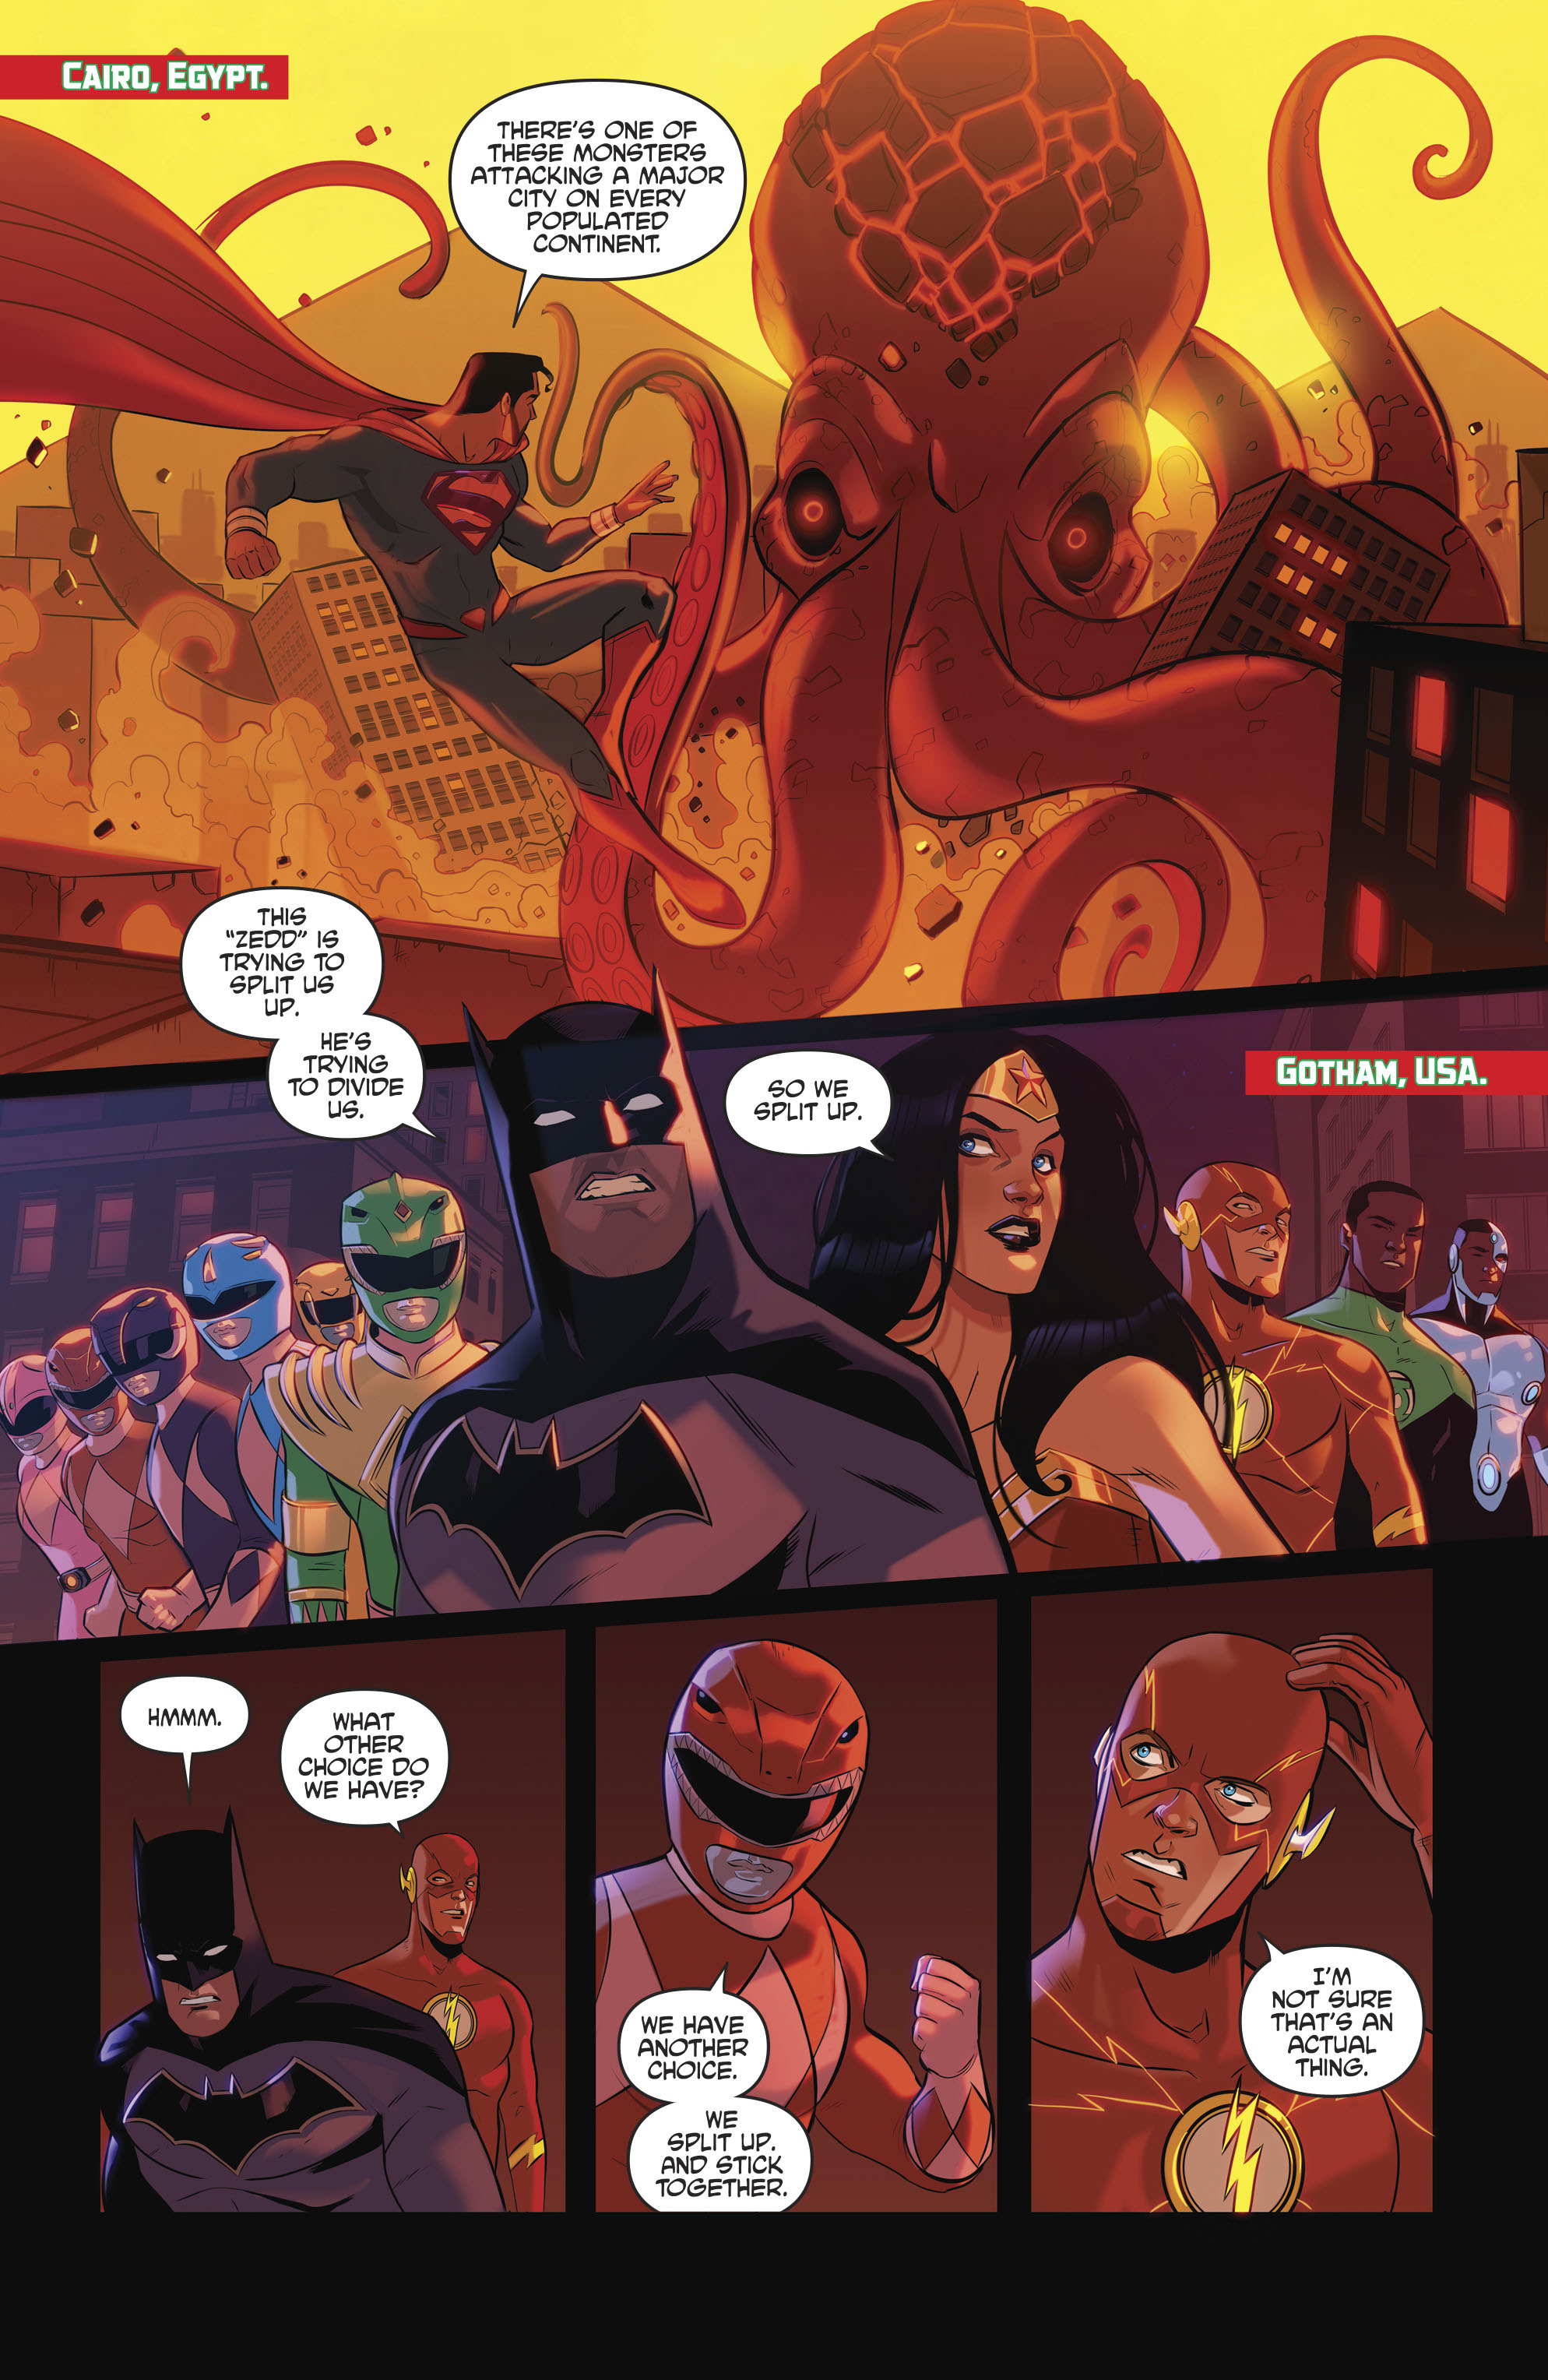 Justice League - Power Rangers (2017-): Chapter 3 - Page 2